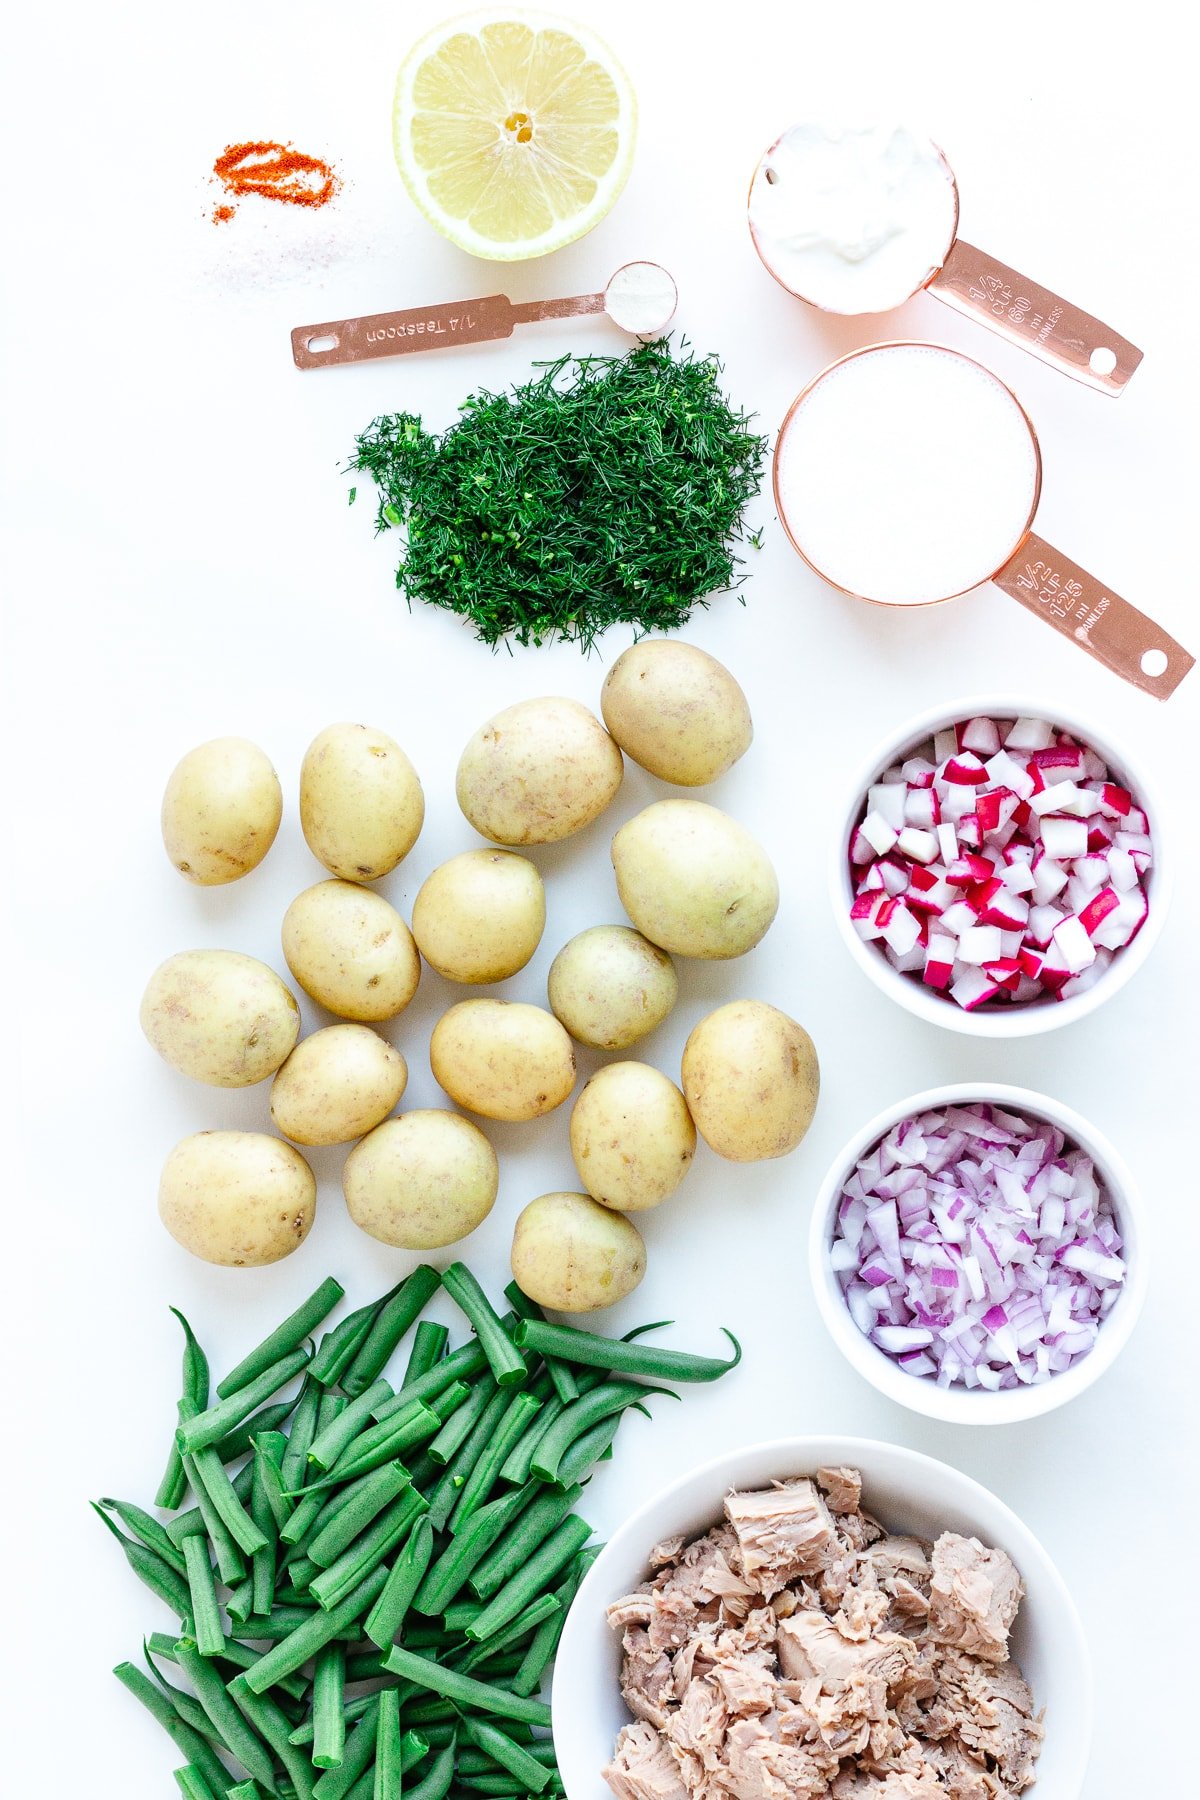 Overhead photo of ingredients needed to make tuna potato salad with dill buttermilk dressing.